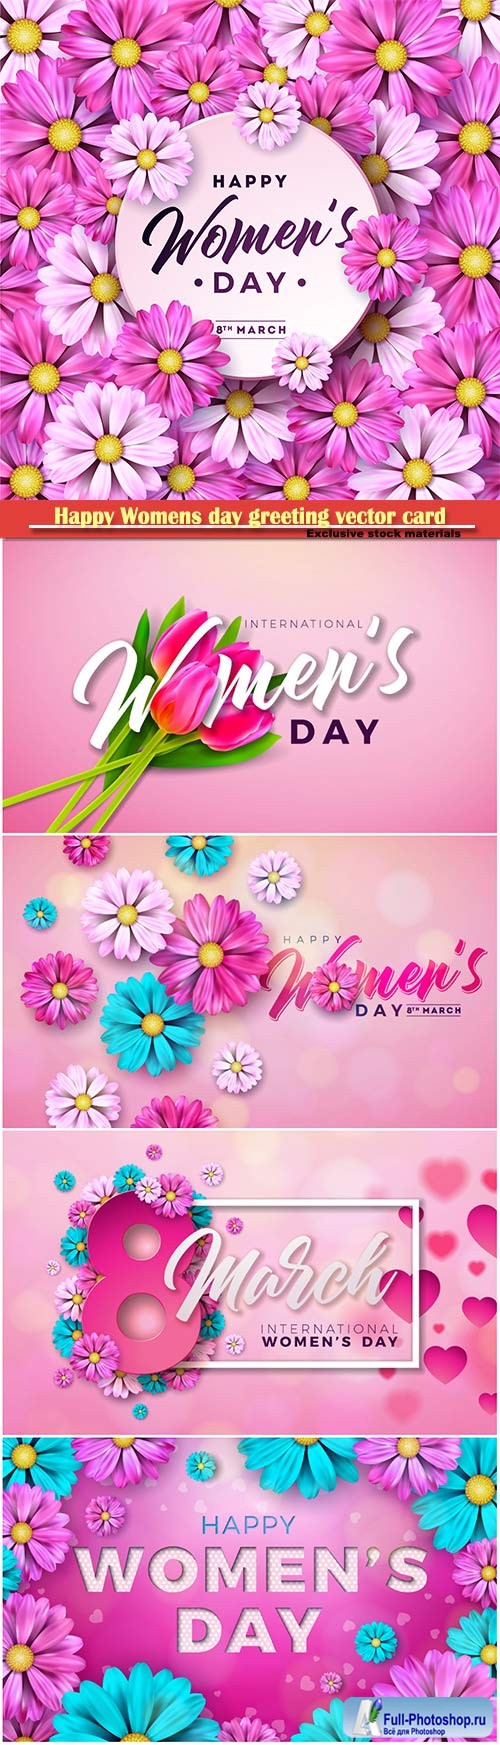 Happy Womens day floral greeting vector card design # 4